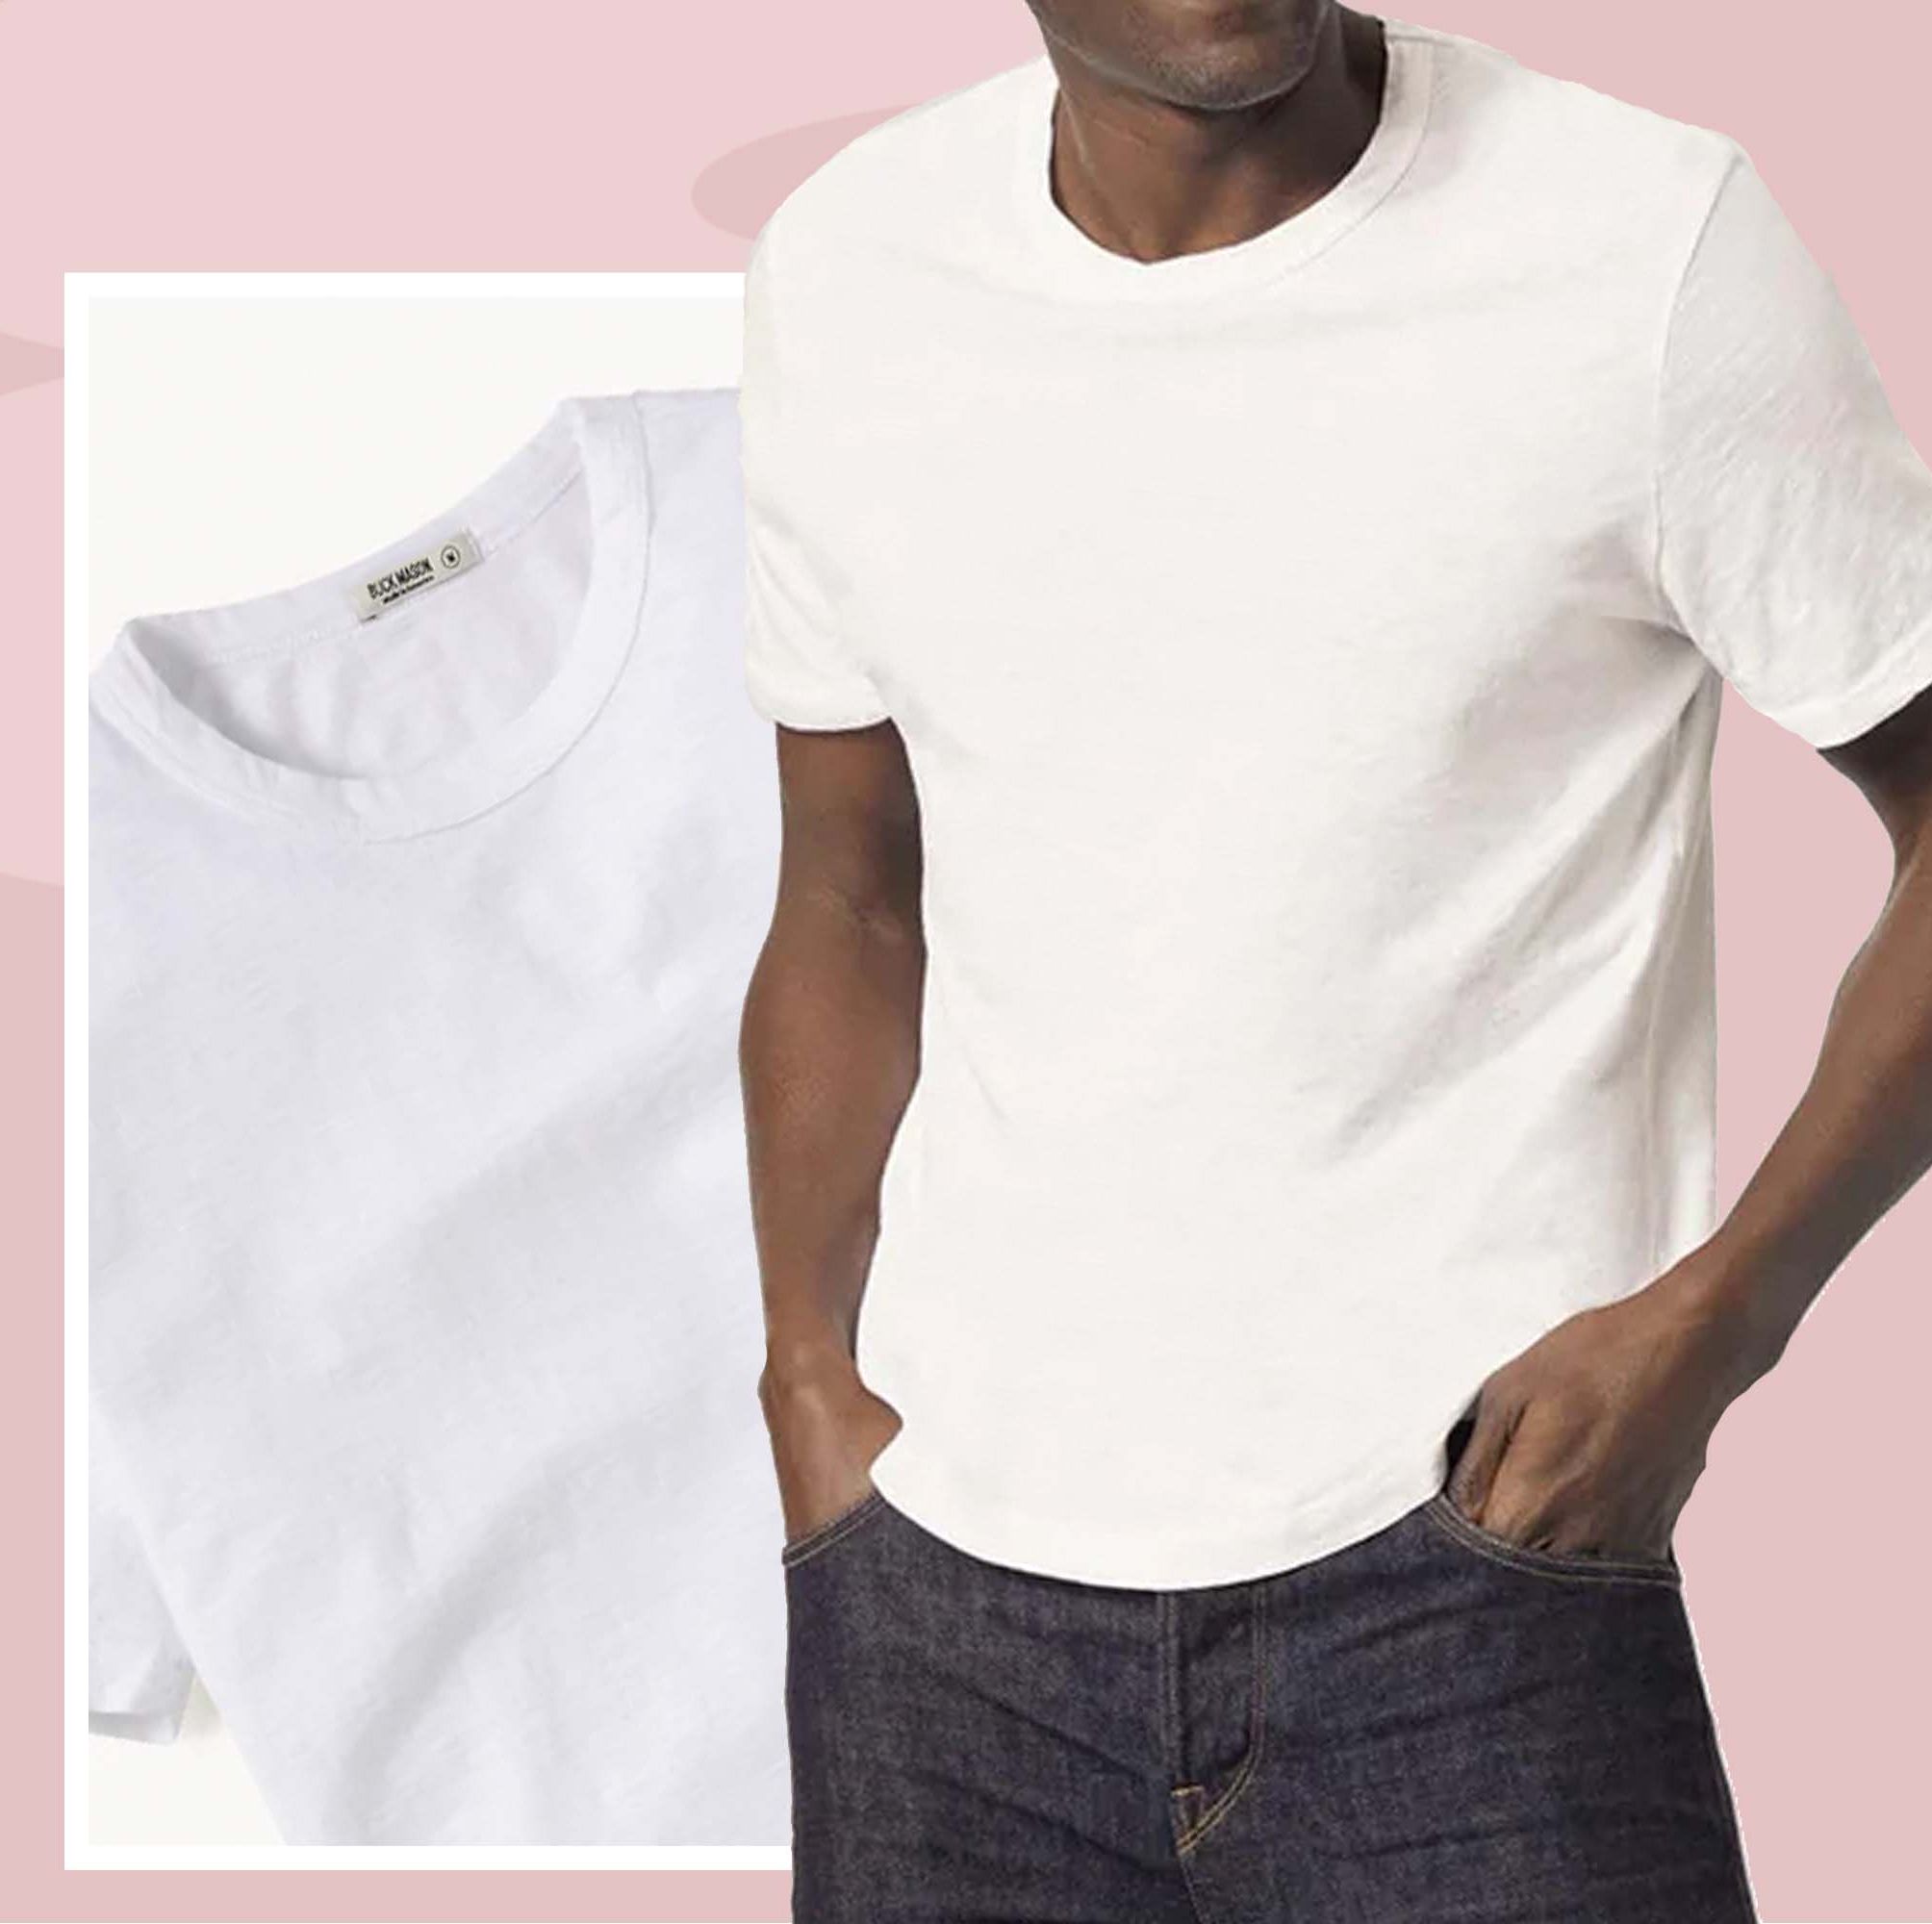 The 25 Essential T-Shirt Brands Every Man Should Know